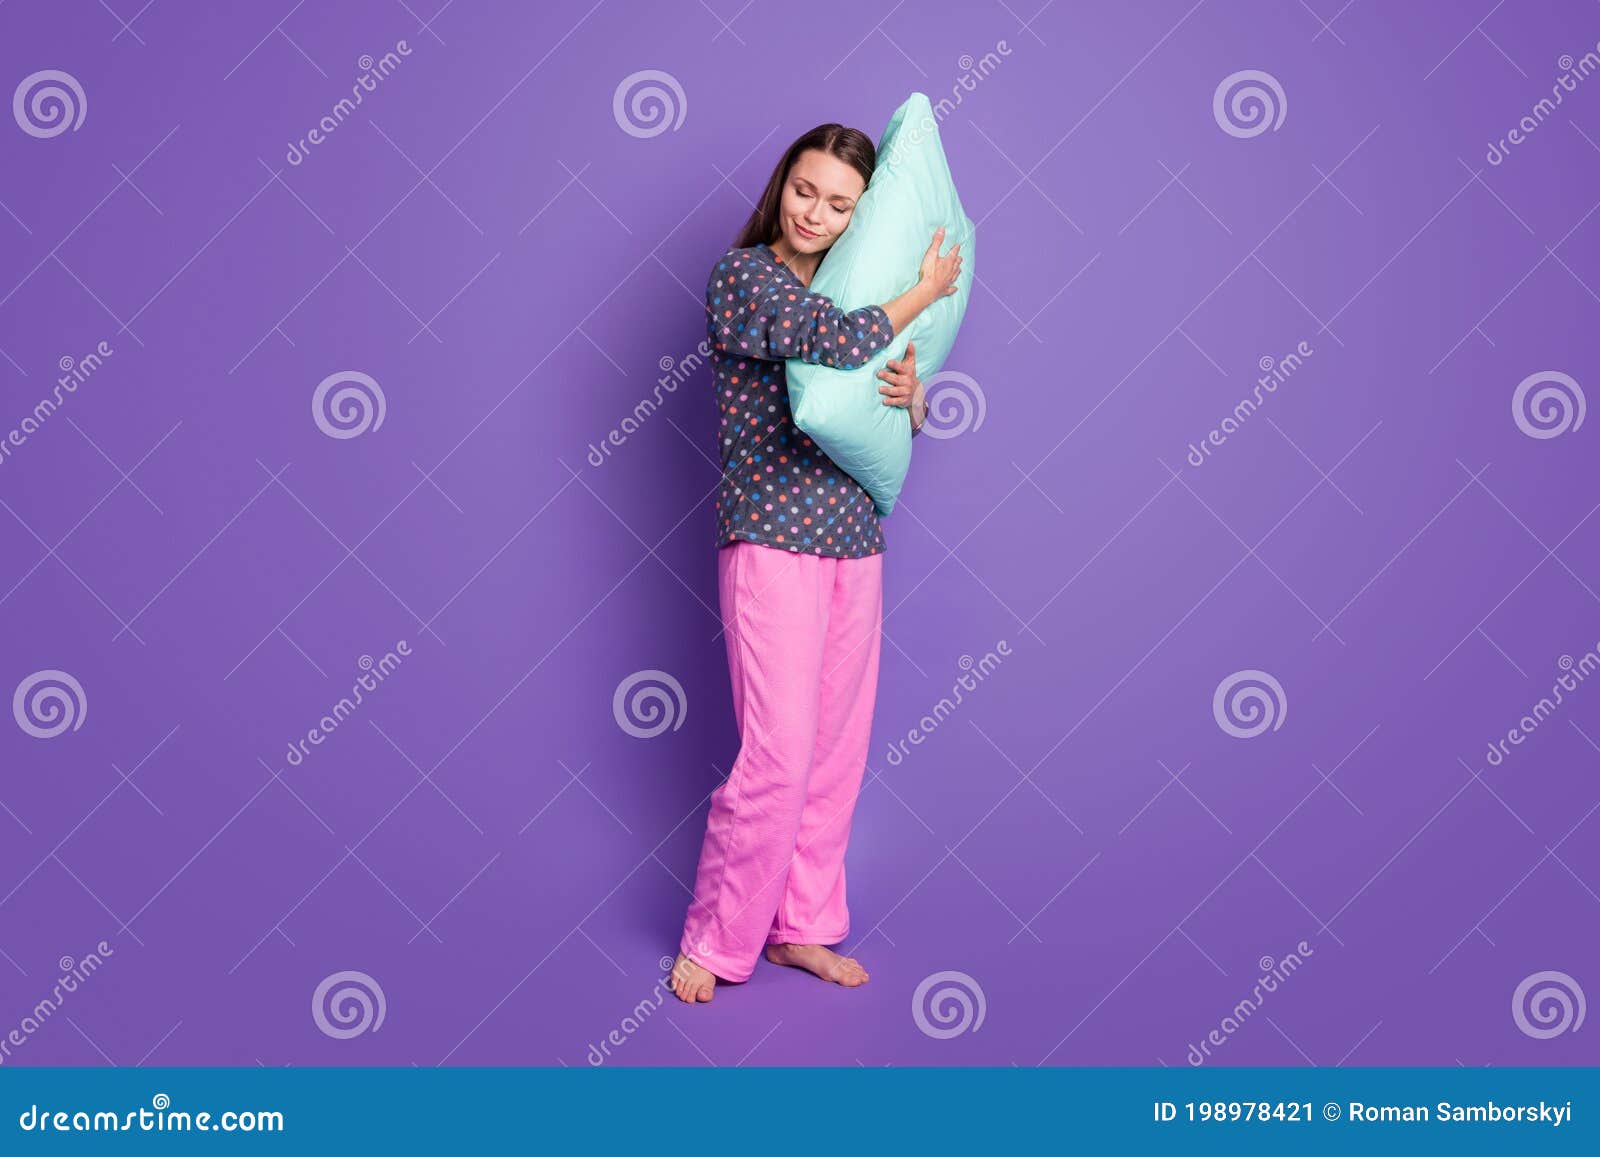 Full Length Photo Of Dream Calm Peaceful Girl Sleep Pillow Wear Dotted Pink Pajama Pants